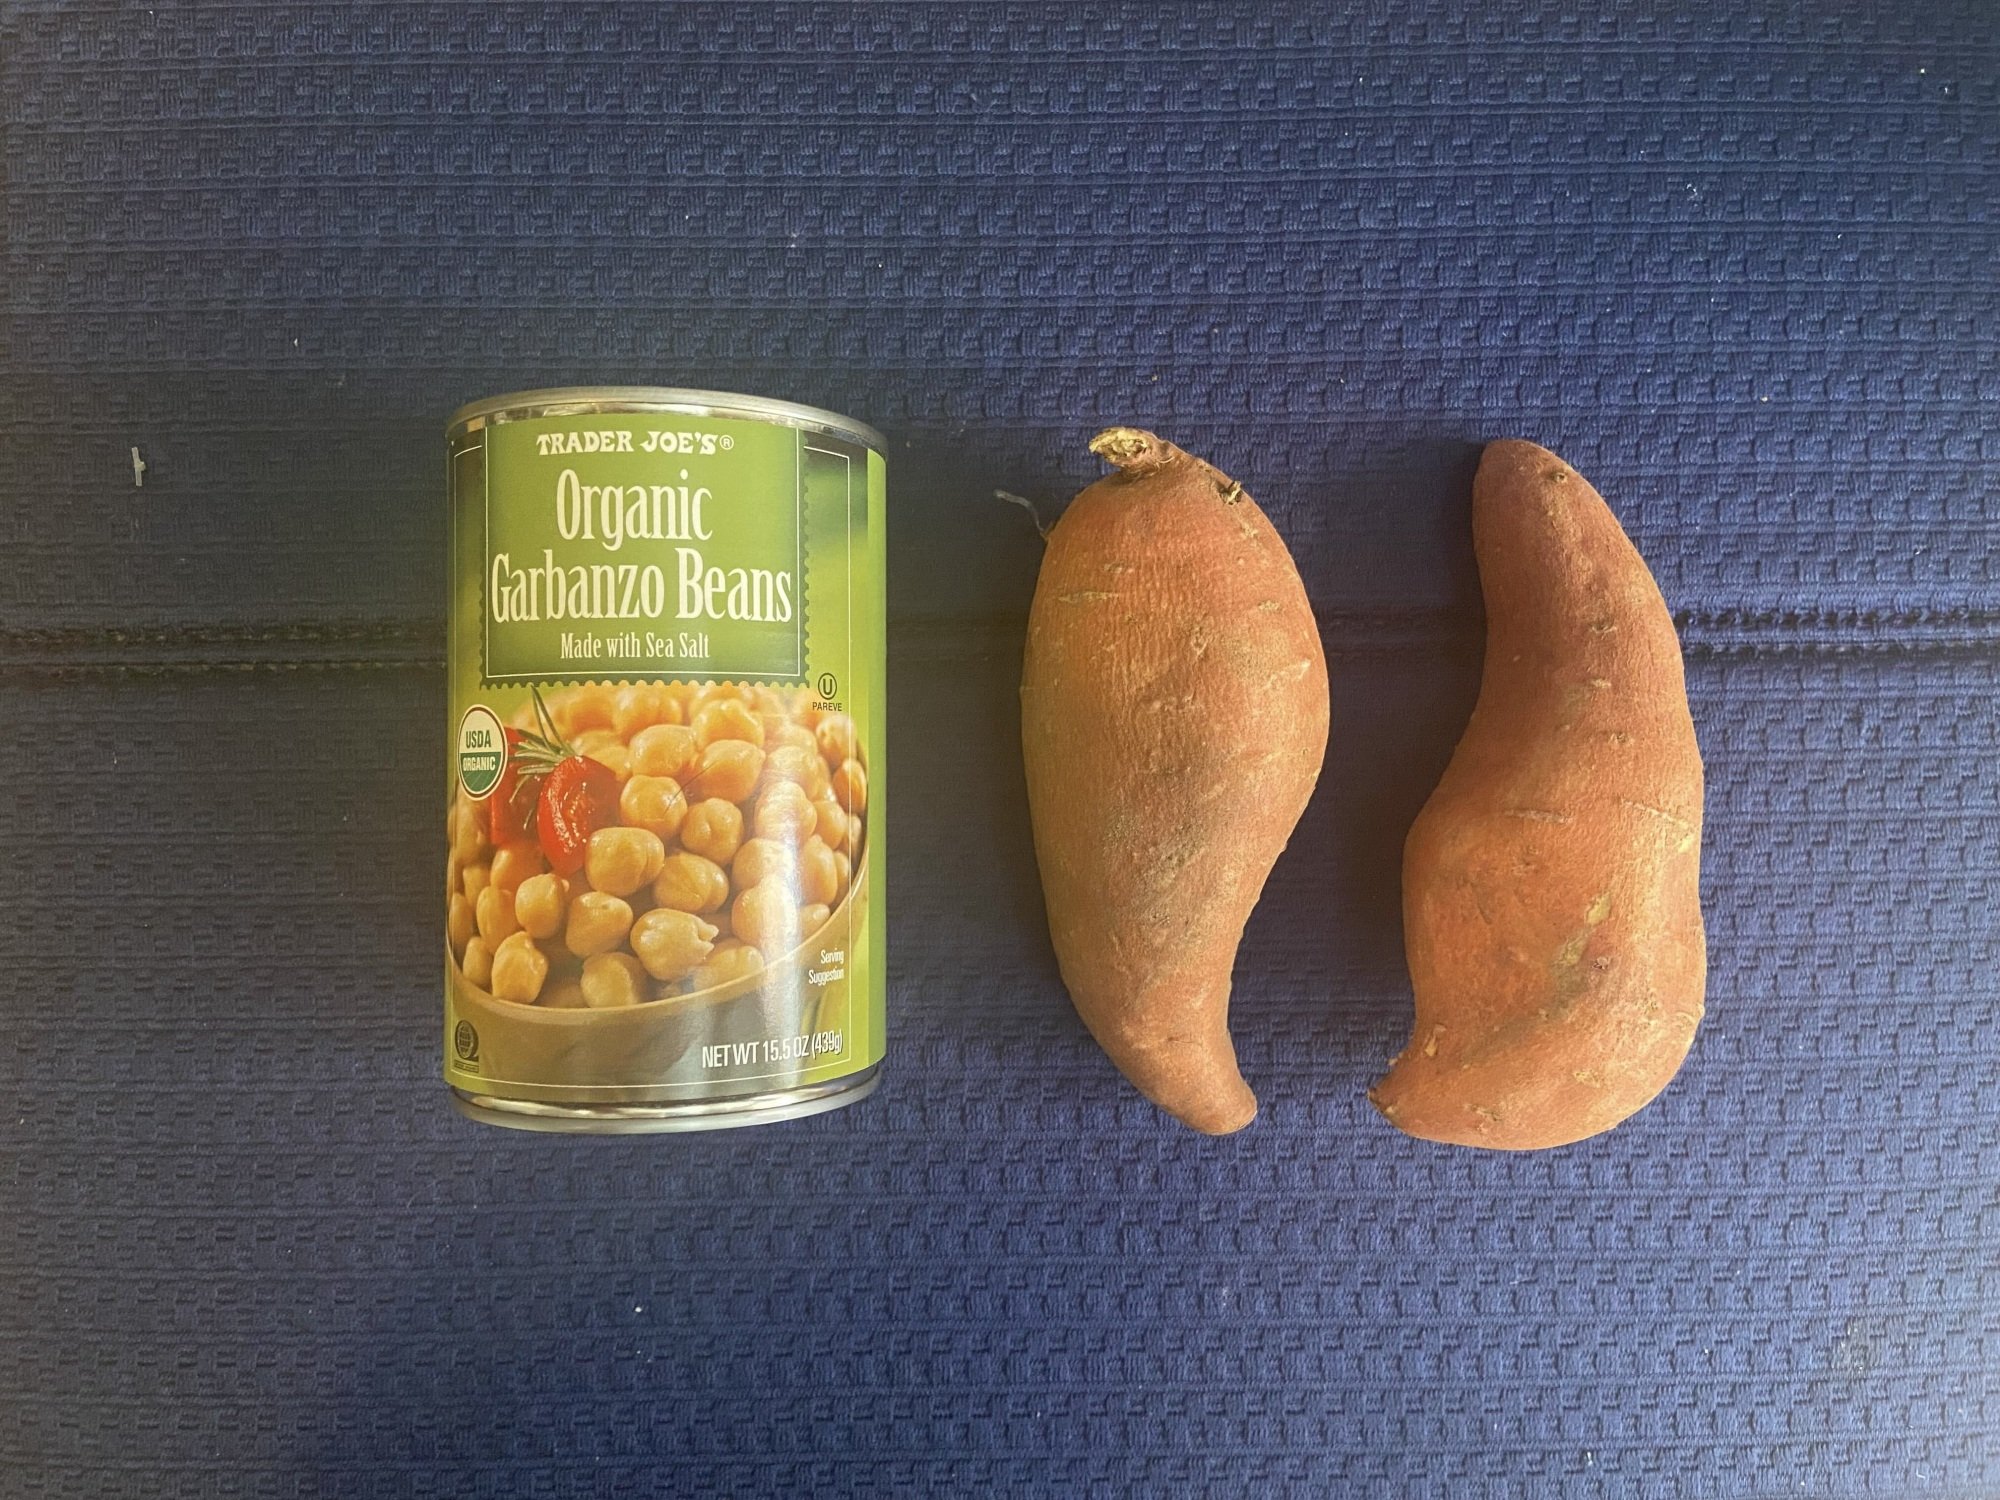 can of trader joes garbanzo beans next to two sweet potatoes 